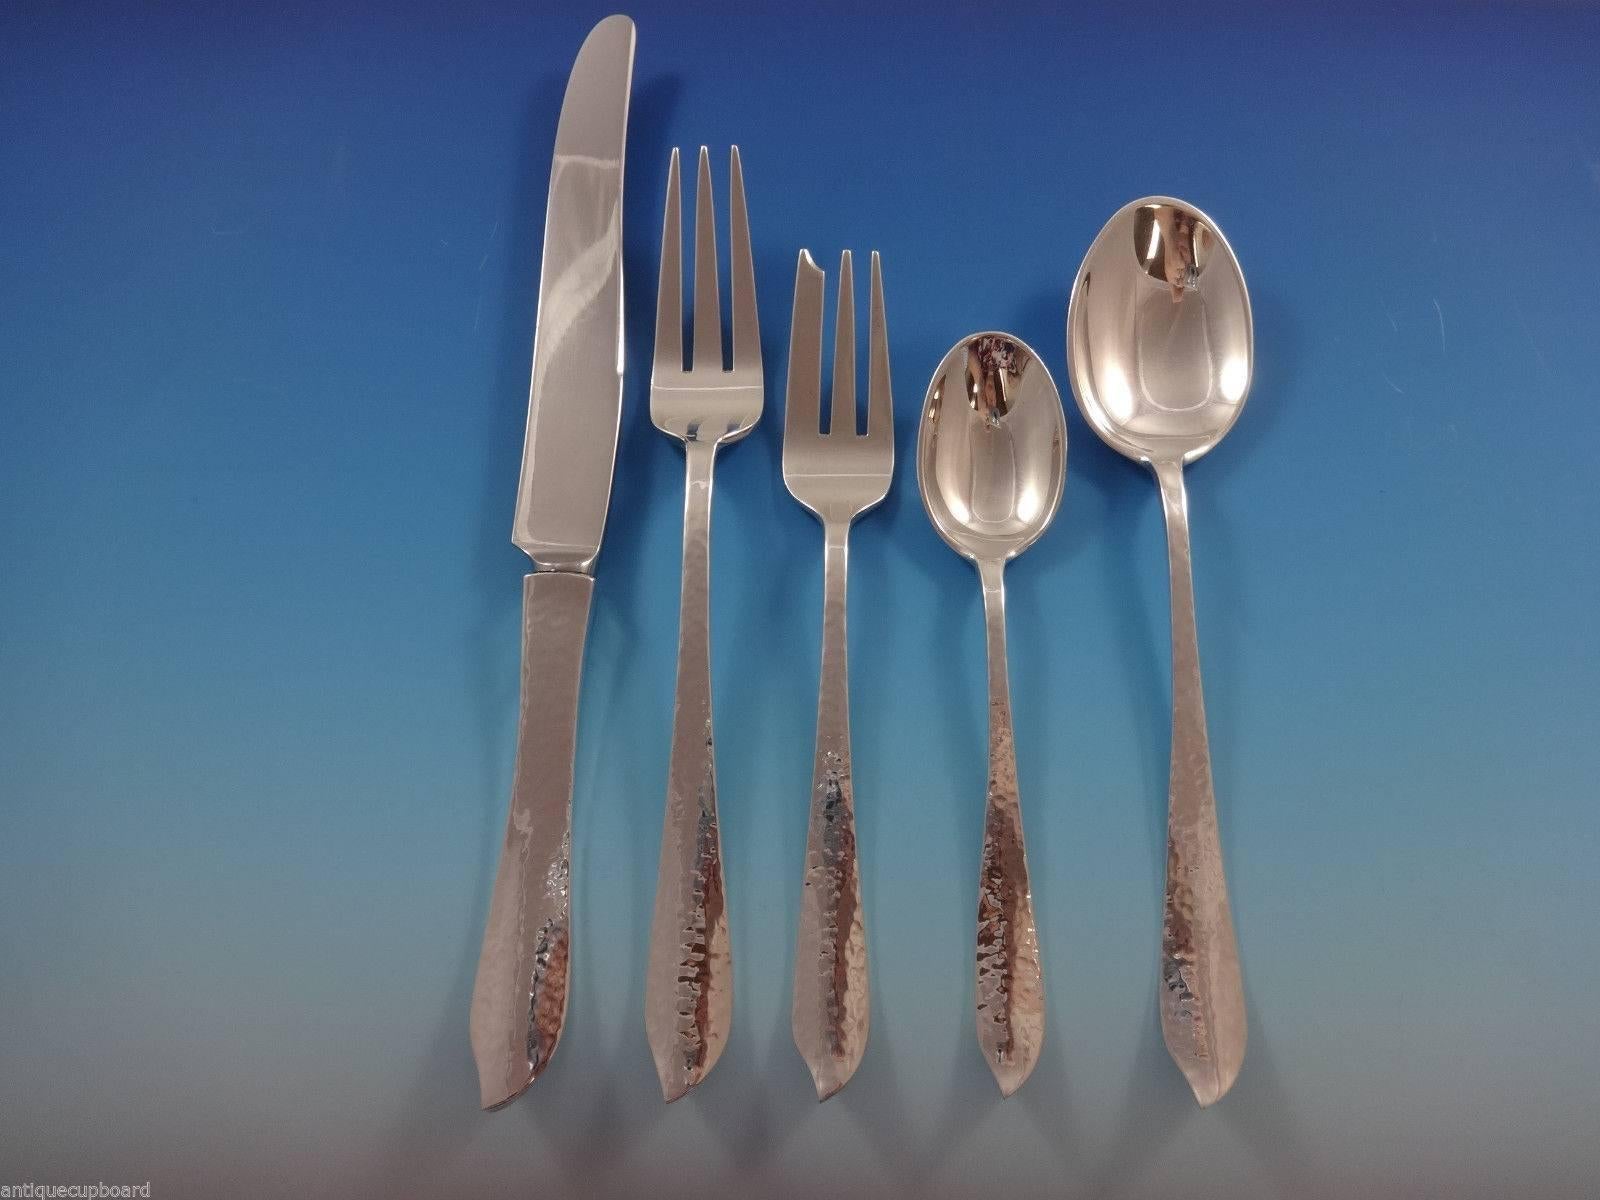 Old Newbury Crafters silver is genuinely handmade. The machine cannot match the quality, durability, look and feel of handmade silver. The hammered finish shows silver at its finest. 

 Exceptional IVY by Old Newbury Crafters sterling silver dinner